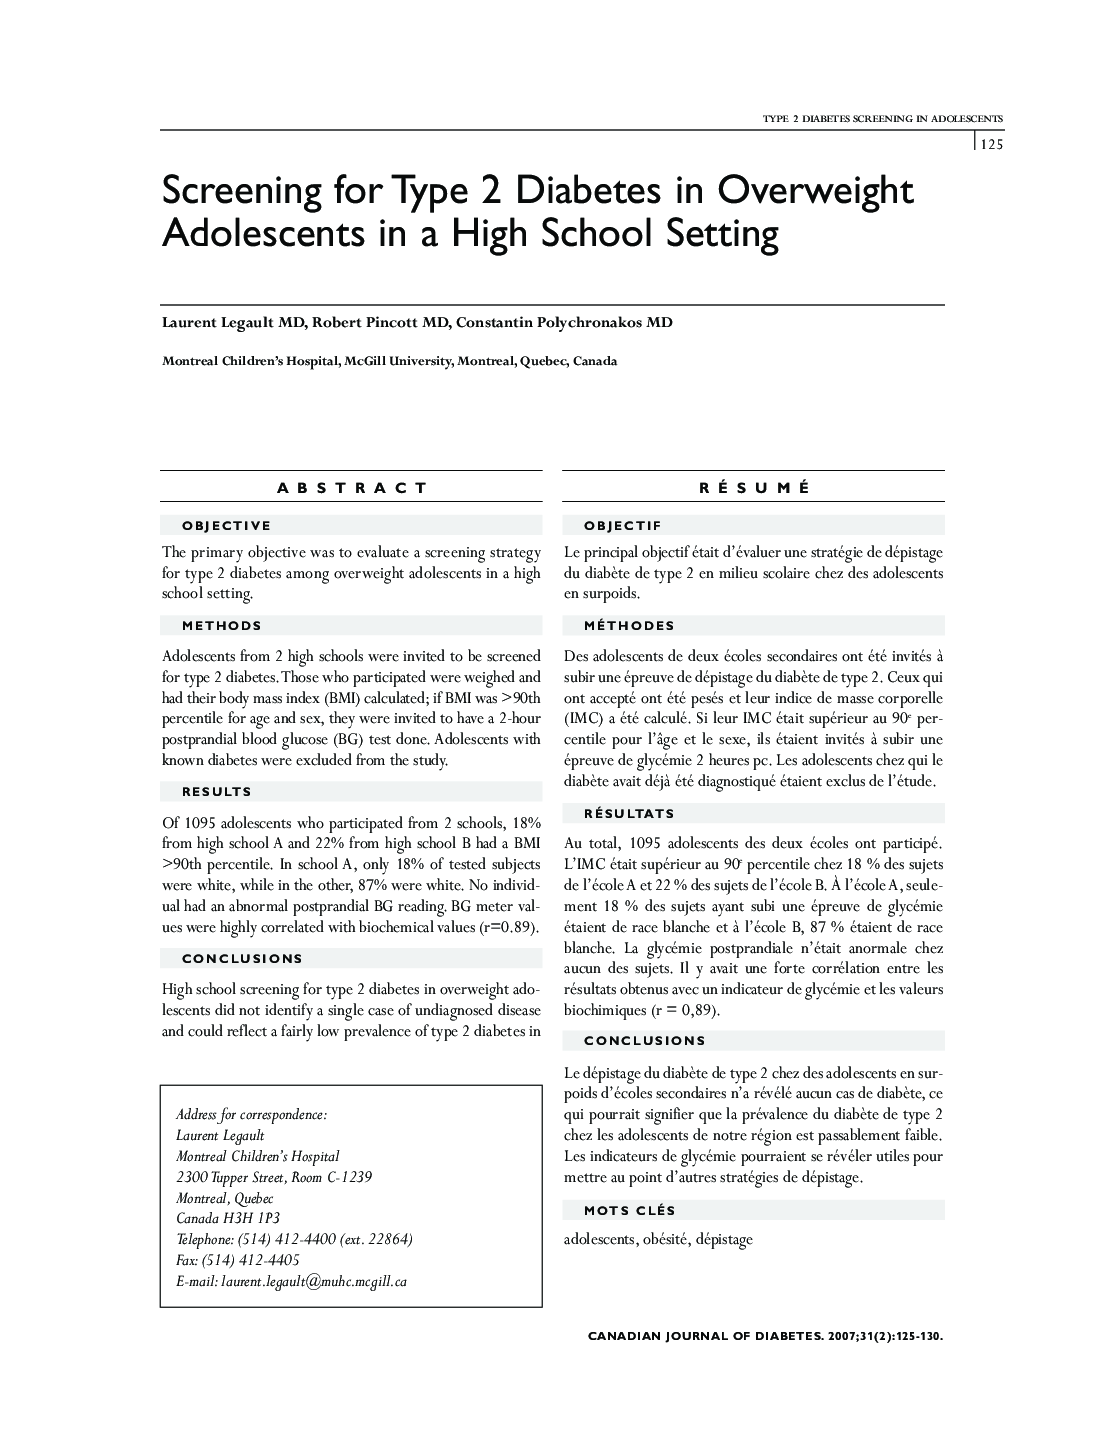 Screening for Type 2 Diabetes in Overweight Adolescents in a High School Setting